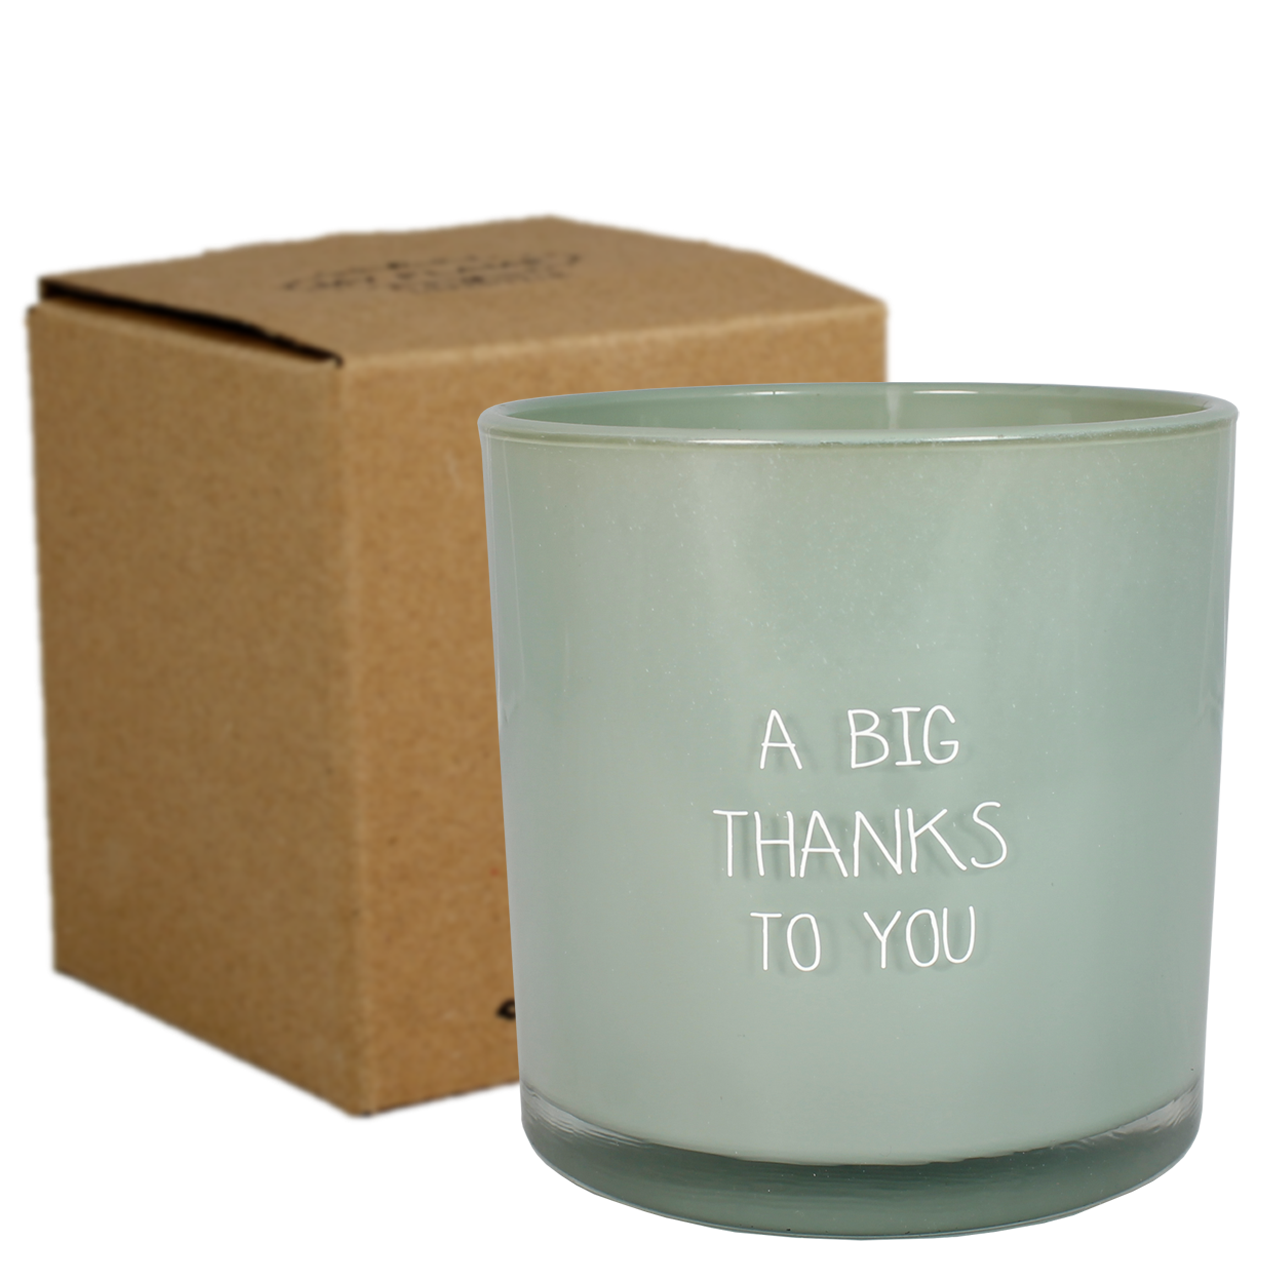 Soy candle - A big thanks to you - Minty Bamboo